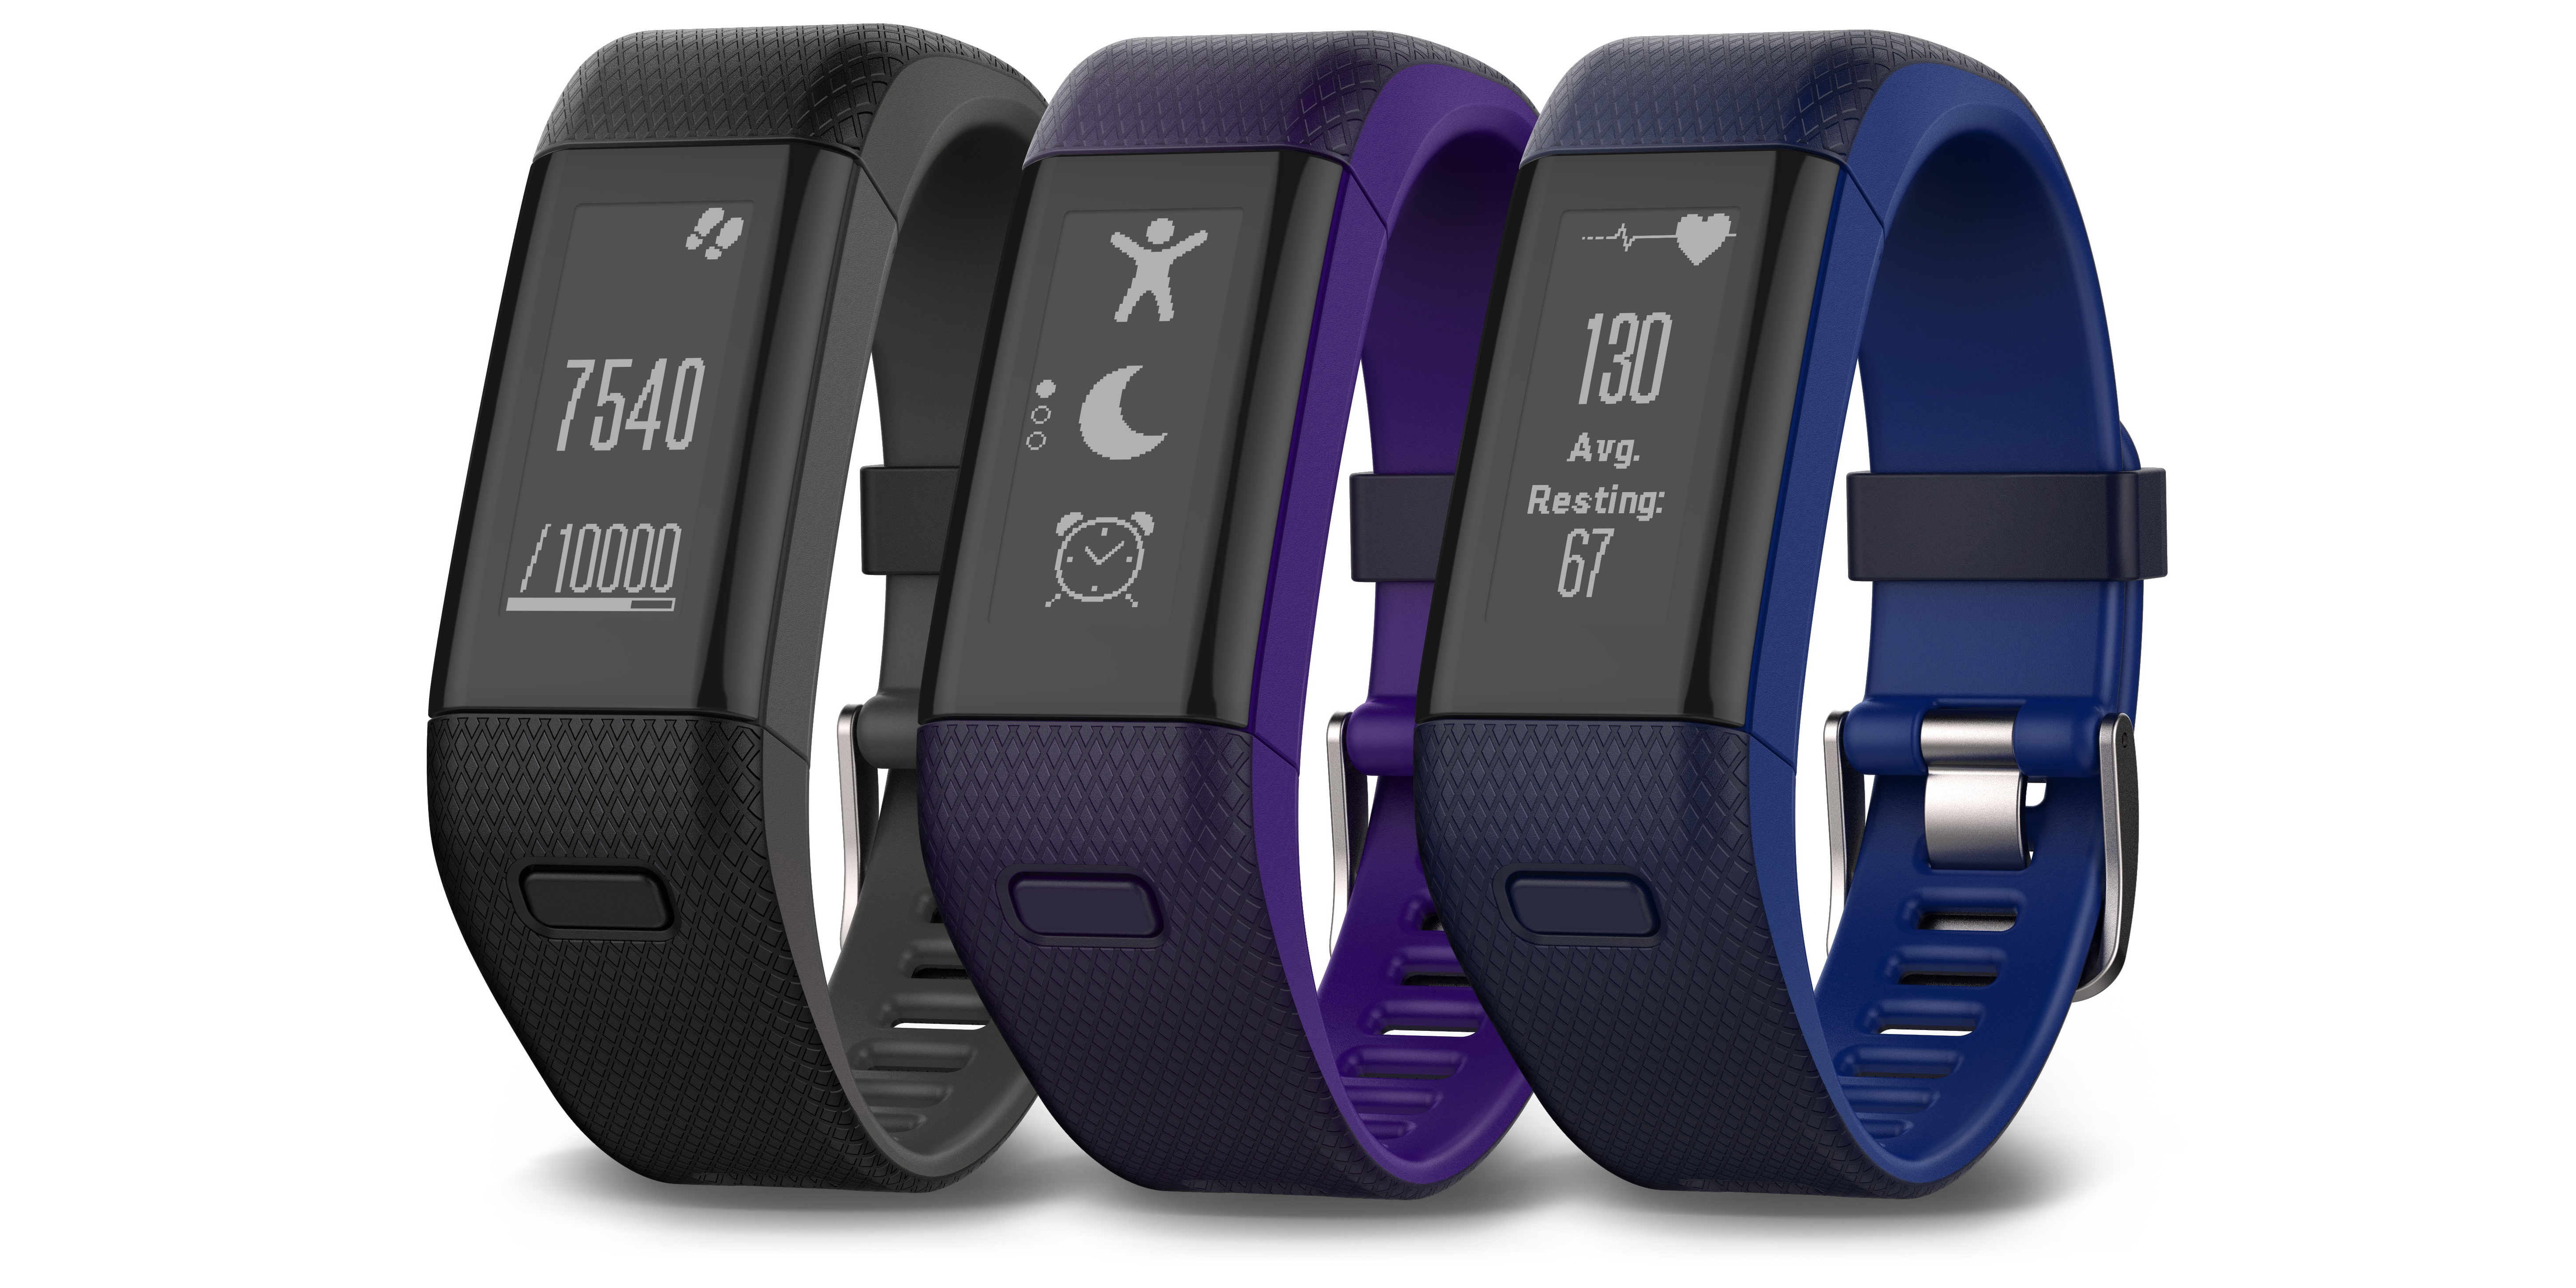 Garmin's new HR+ opts and heart rate monitoring over battery life